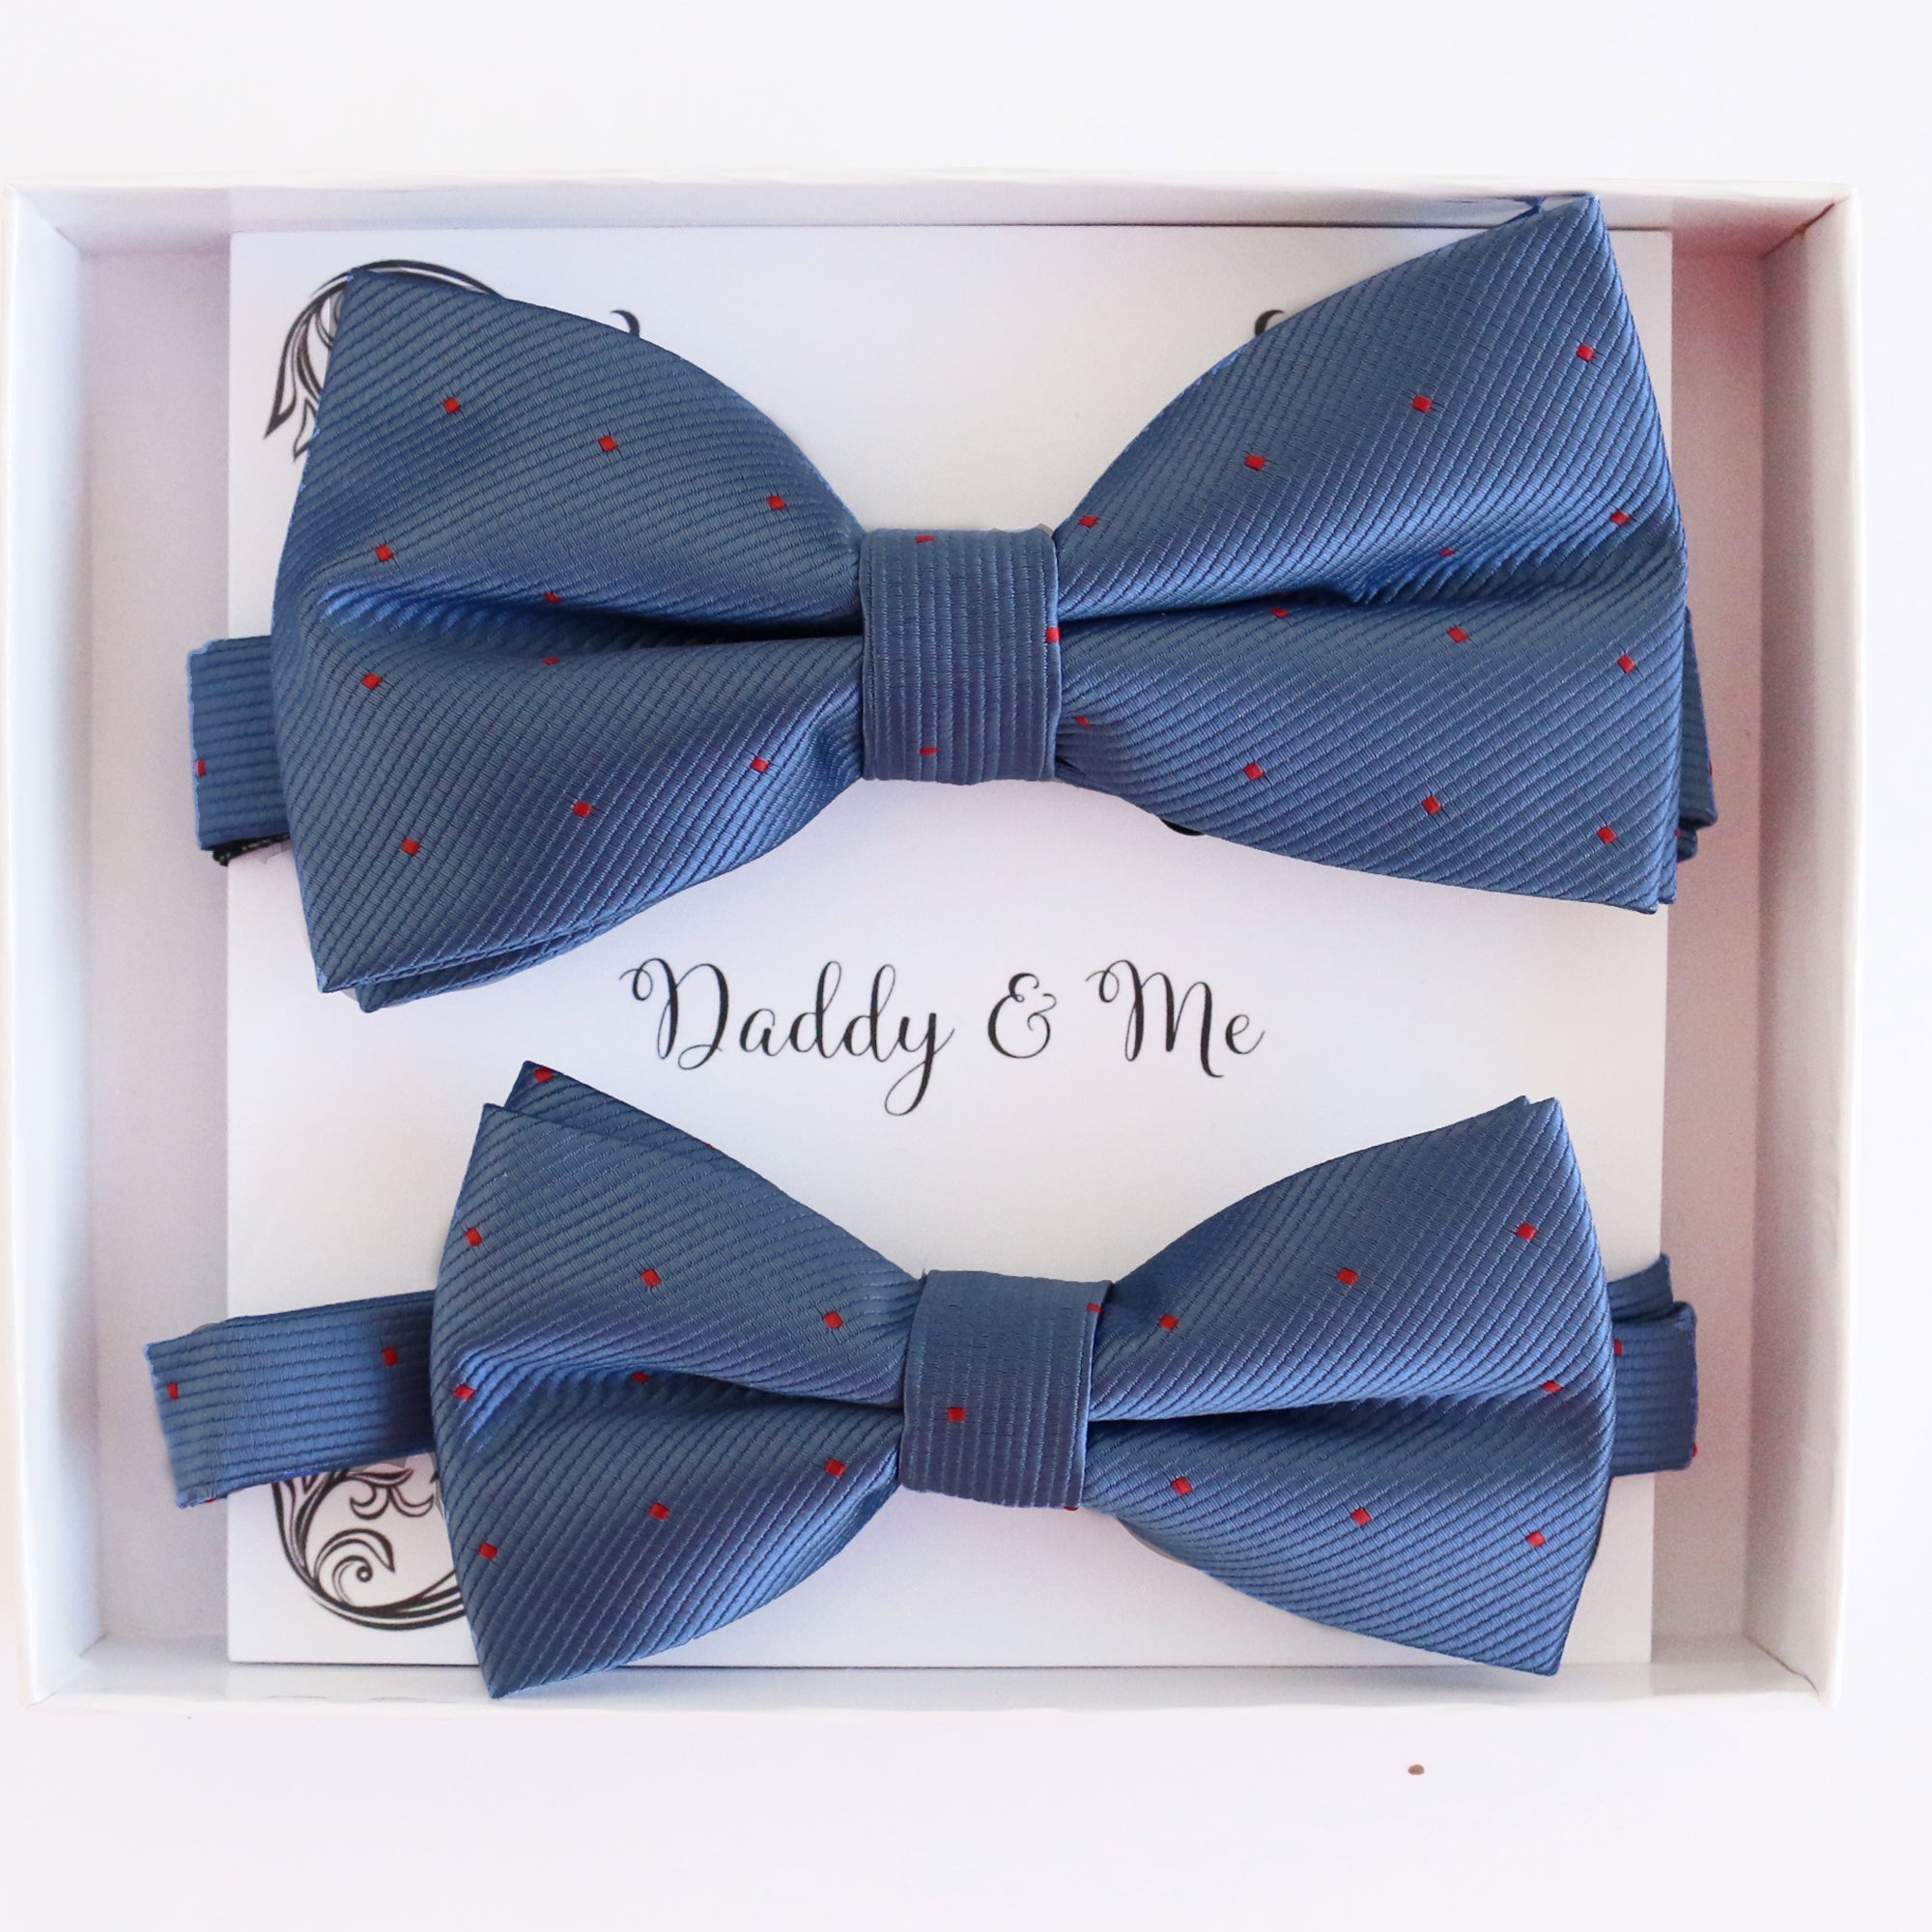 Blue red polka dots Bow tie set Kids Adult bow tie Daddy me Father son match, Country blue, kids bow Adjustable pre tied, High quality